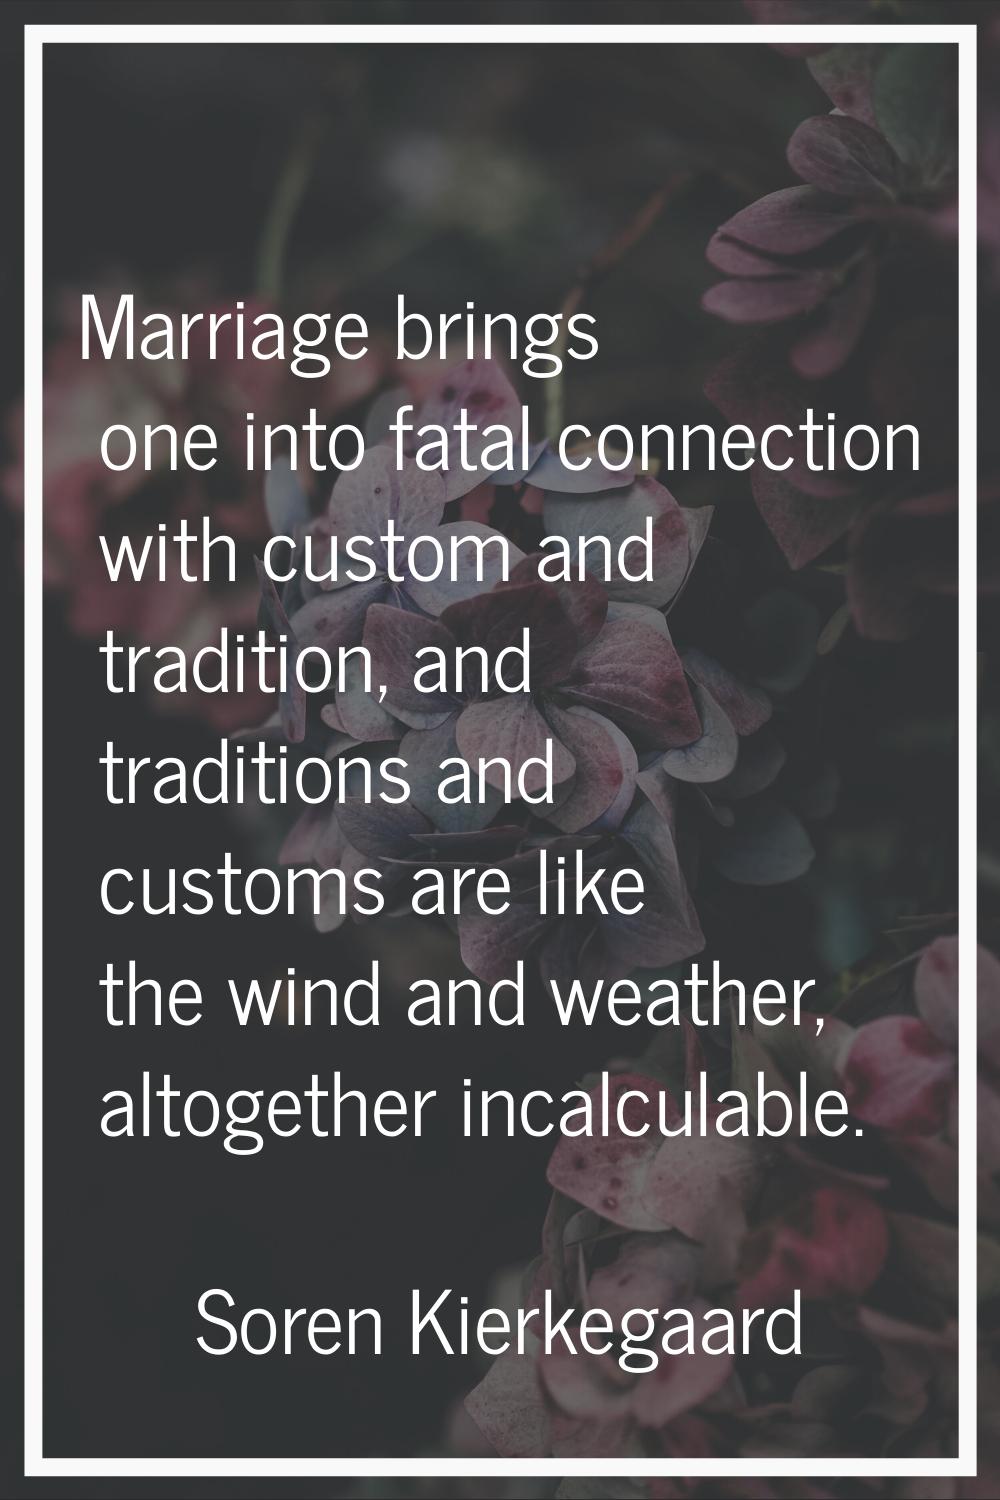 Marriage brings one into fatal connection with custom and tradition, and traditions and customs are